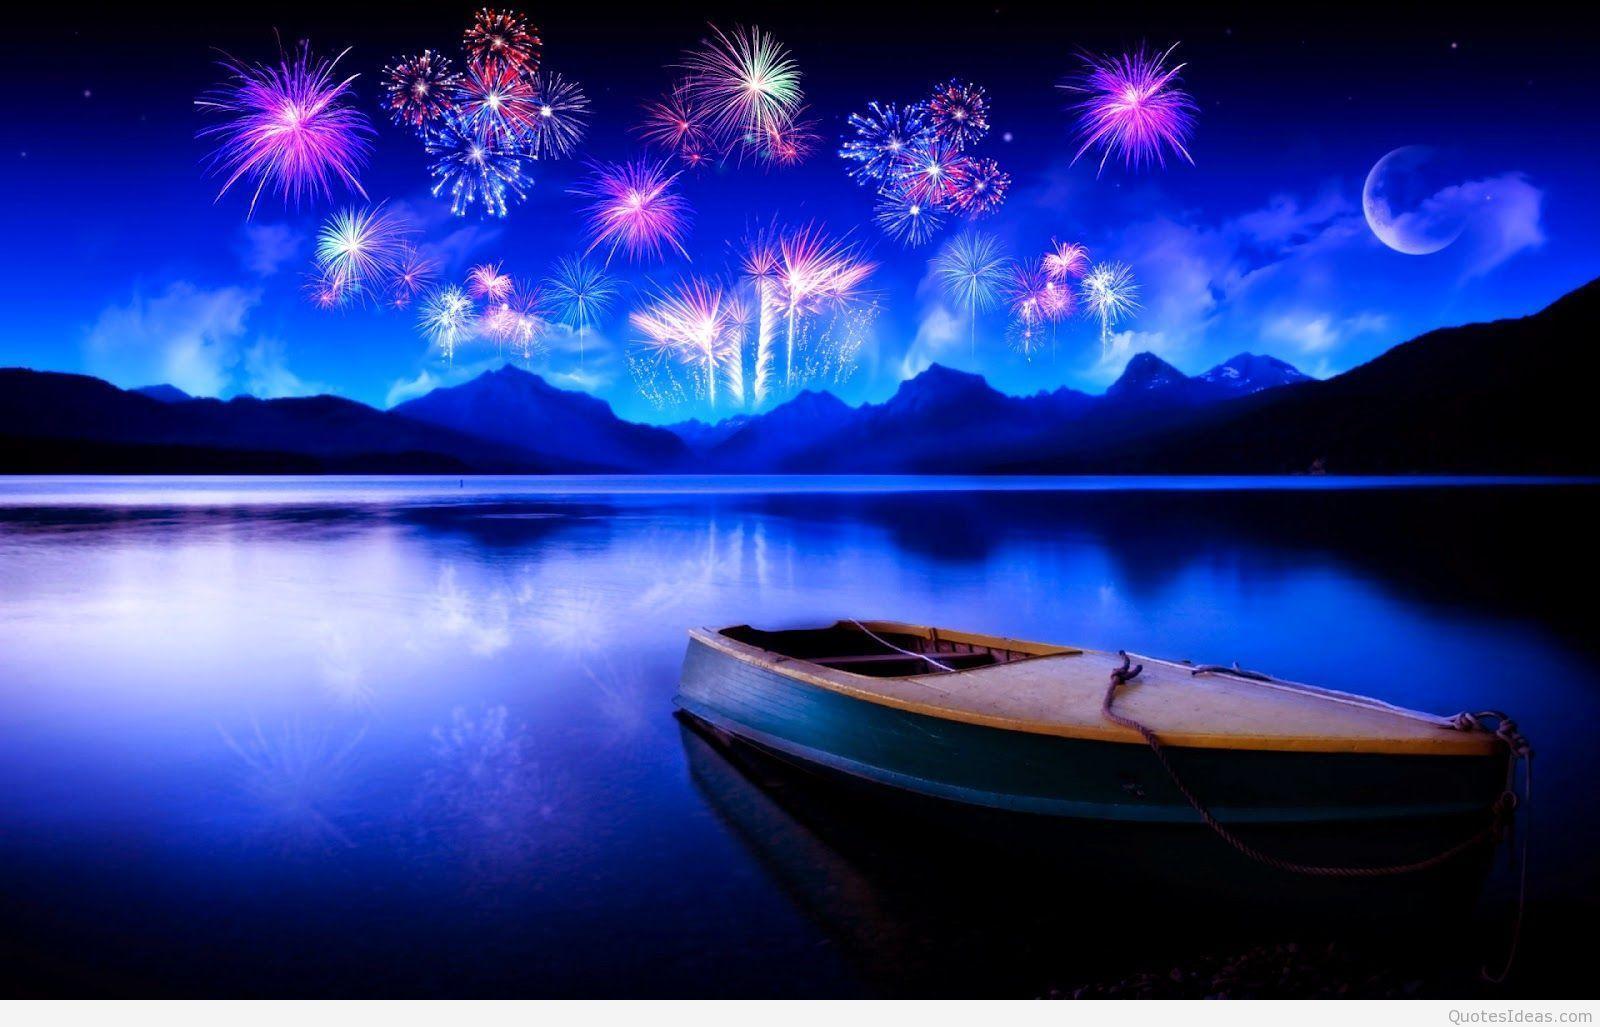 Happy New Year HD Wallpaper. New Year Image